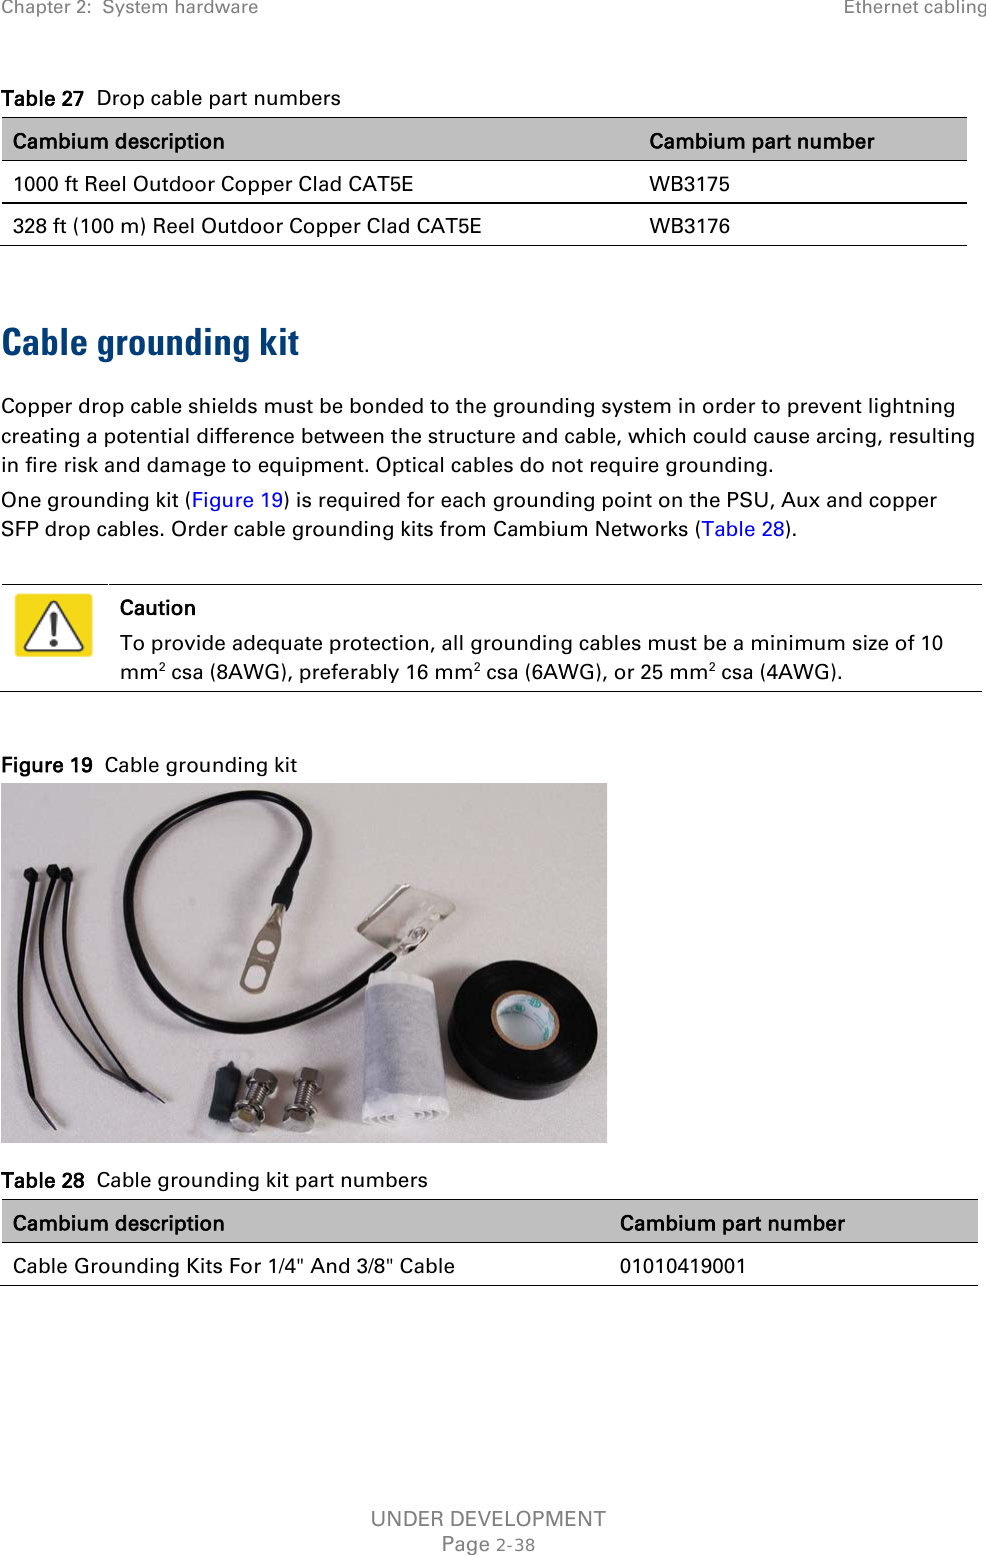 Chapter 2:  System hardware Ethernet cabling  Table 27  Drop cable part numbers Cambium description Cambium part number 1000 ft Reel Outdoor Copper Clad CAT5E WB3175 328 ft (100 m) Reel Outdoor Copper Clad CAT5E WB3176  Cable grounding kit Copper drop cable shields must be bonded to the grounding system in order to prevent lightning creating a potential difference between the structure and cable, which could cause arcing, resulting in fire risk and damage to equipment. Optical cables do not require grounding. One grounding kit (Figure 19) is required for each grounding point on the PSU, Aux and copper SFP drop cables. Order cable grounding kits from Cambium Networks (Table 28).   Caution To provide adequate protection, all grounding cables must be a minimum size of 10 mm2 csa (8AWG), preferably 16 mm2 csa (6AWG), or 25 mm2 csa (4AWG).  Figure 19  Cable grounding kit  Table 28  Cable grounding kit part numbers Cambium description Cambium part number Cable Grounding Kits For 1/4&quot; And 3/8&quot; Cable 01010419001  UNDER DEVELOPMENT Page 2-38 